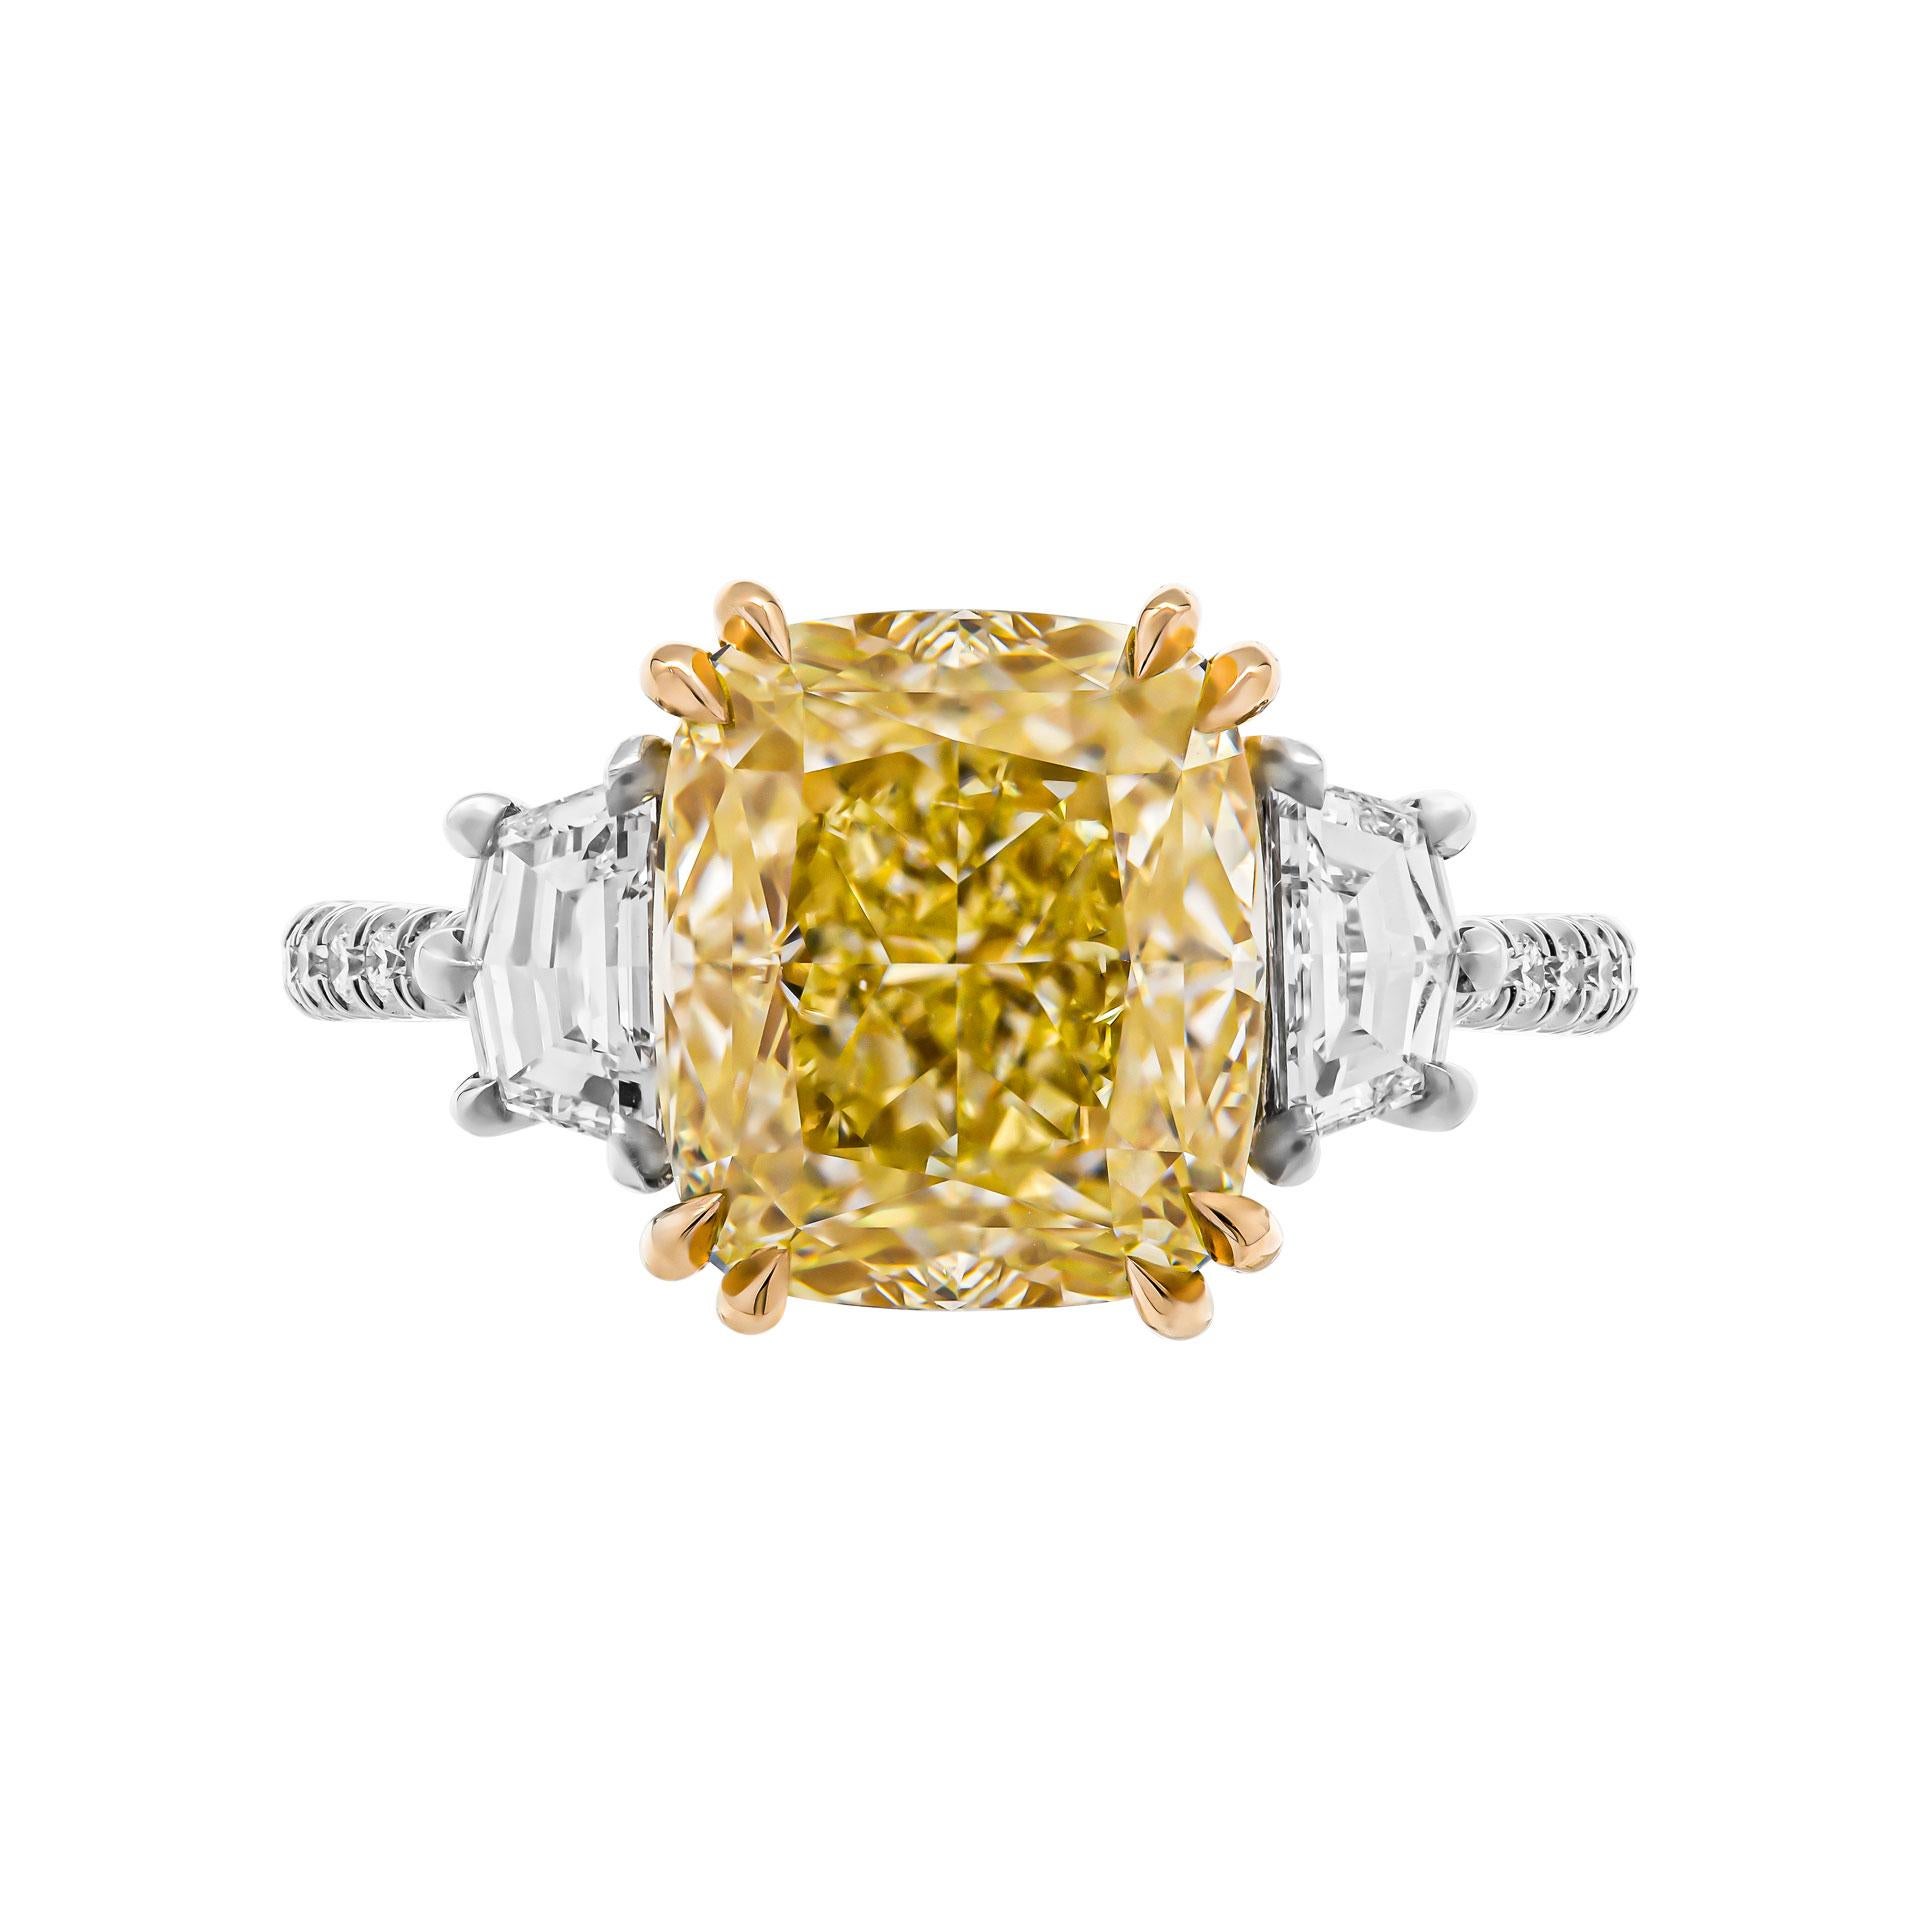 Mounted in handmade custom design setting featuring Platinum 950 & 18K Yellow Gold with pave on the shank

Setting features exceptional pave work, delicate yet sturdy, includes approximately 0.26ct  of small full brilliant cut diamonds. 
Side stones